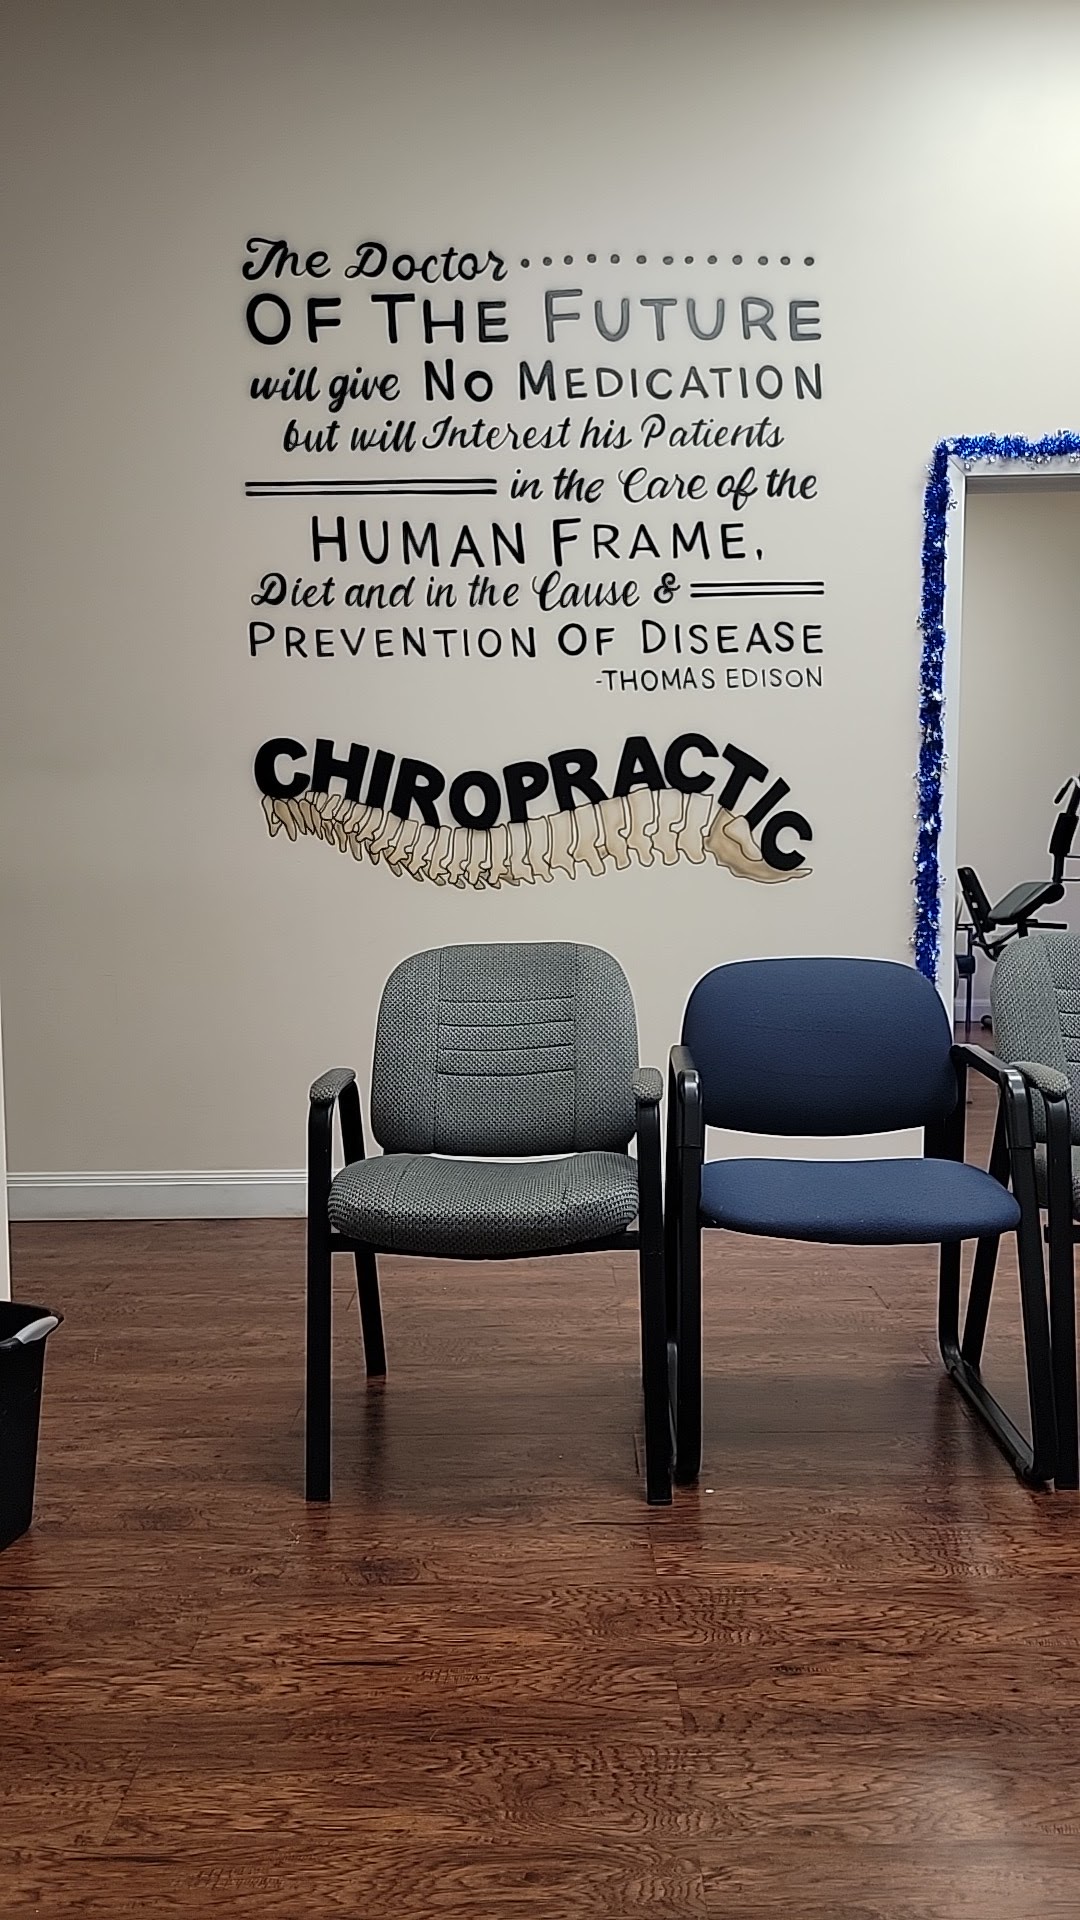 Full Circle Chiropractic and Wellness Center